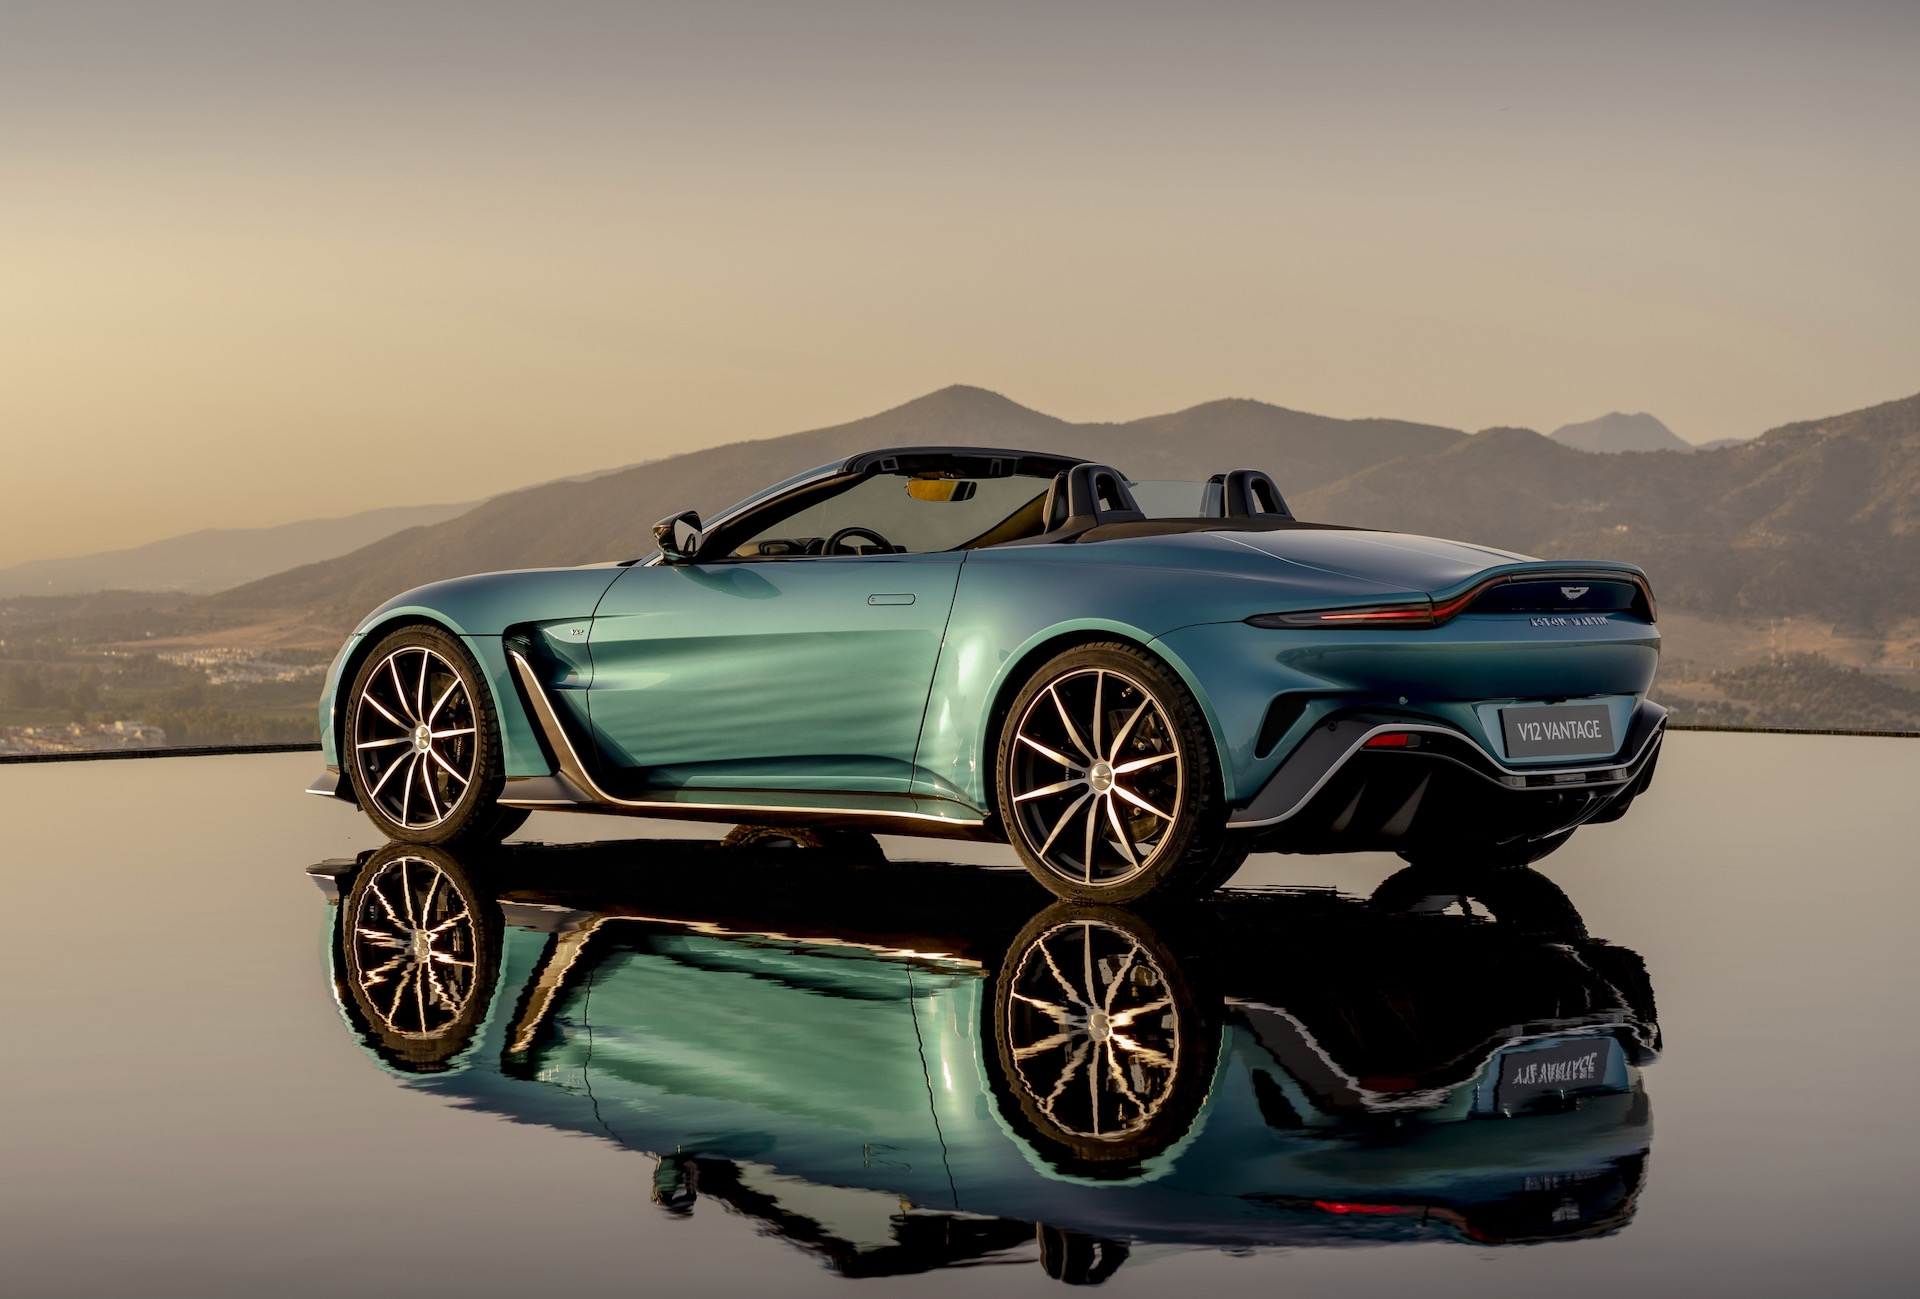 Aston Martin V12 Vantage Roadster debuts with most powerful V12 yet